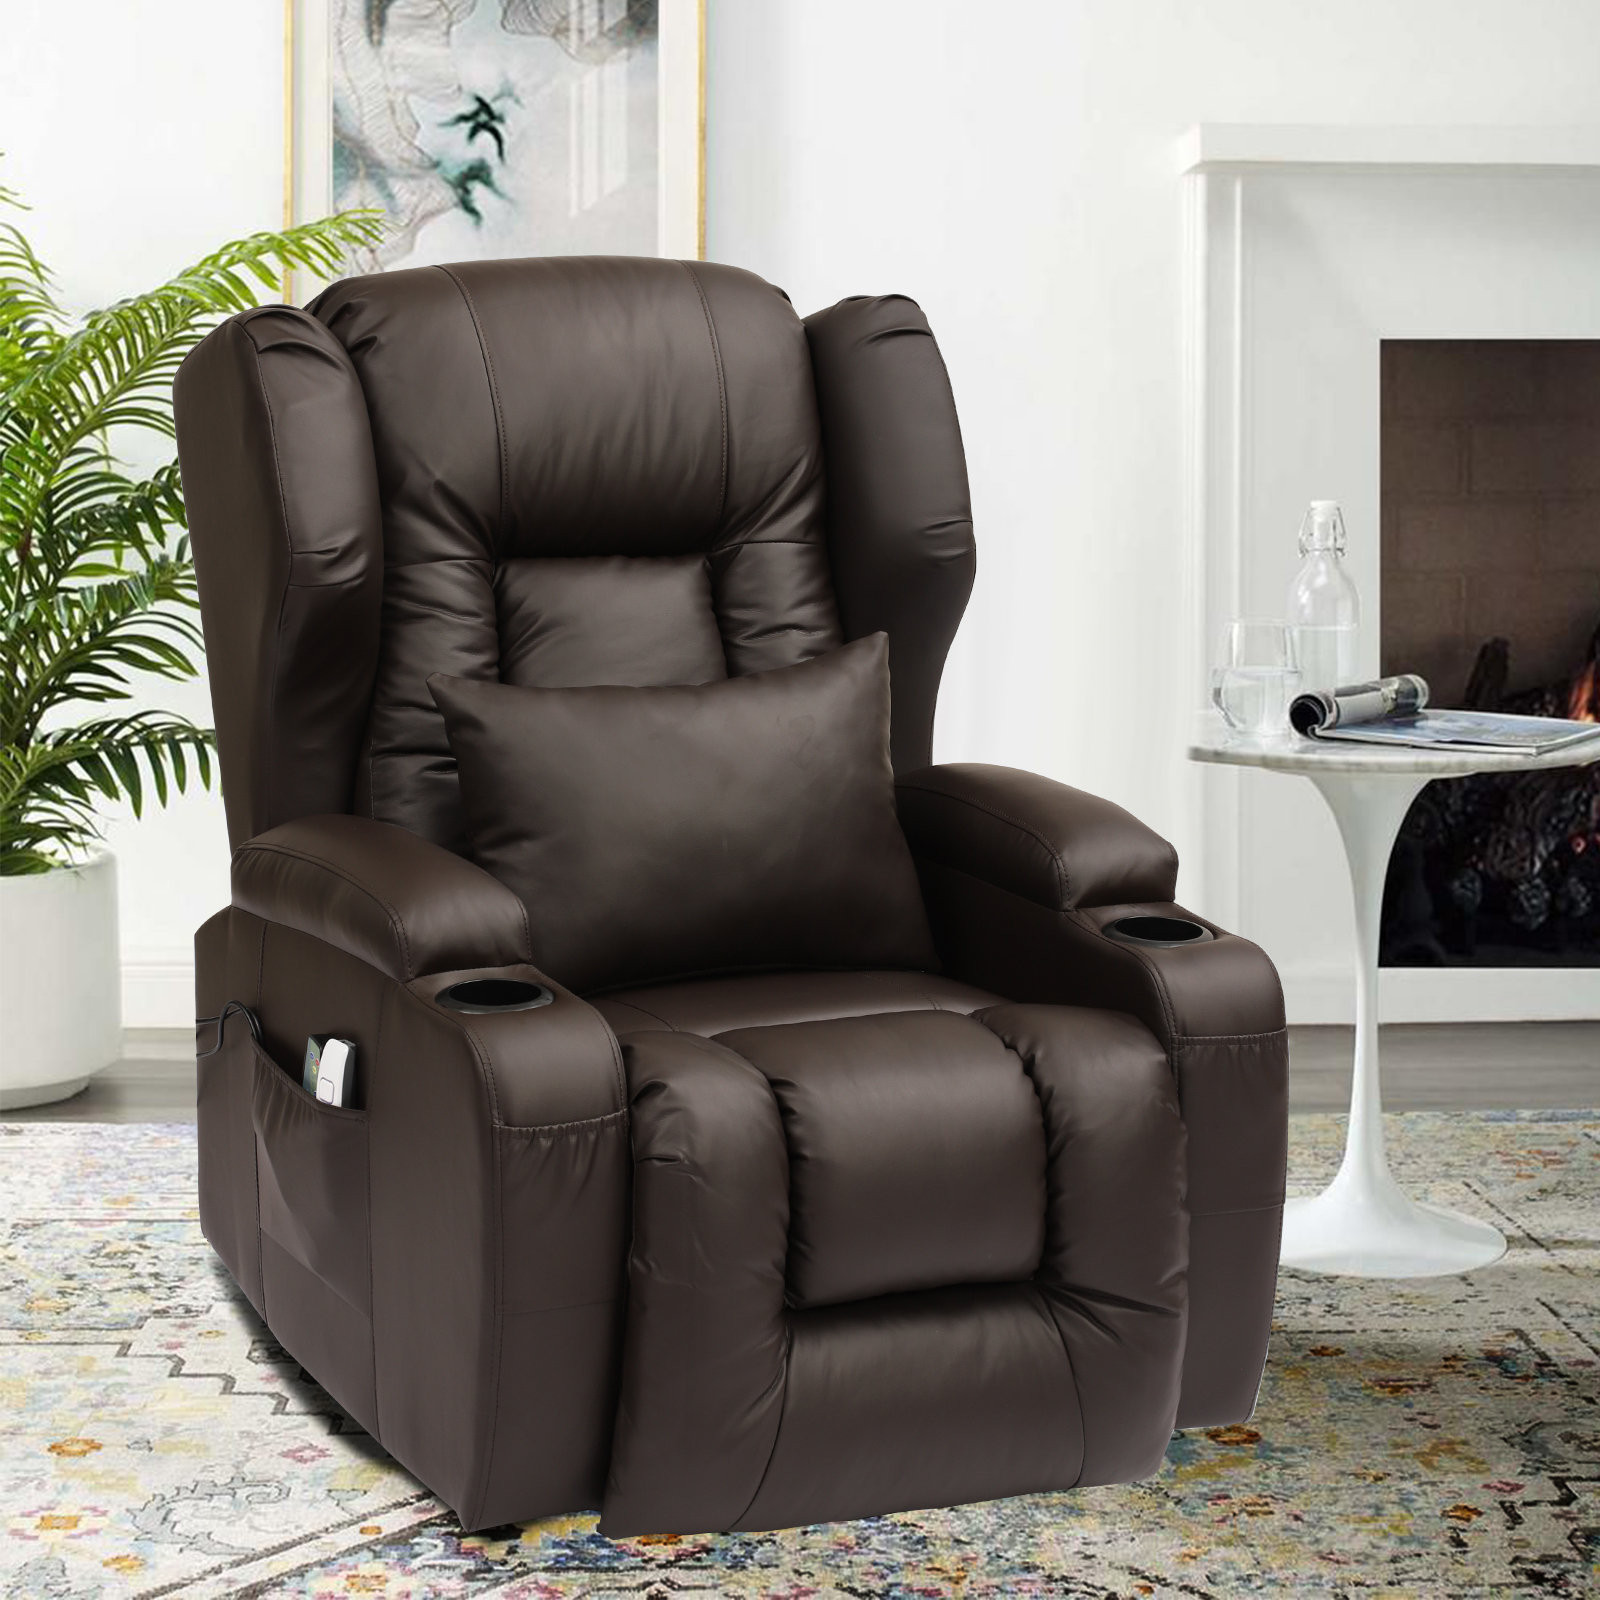 Lift Chairs Recliners for Elderly,Recliner Chairs for Adults,Recliner  Chair,Electric Recliner with Massage and Heating,Pu Leather,Dark Brown